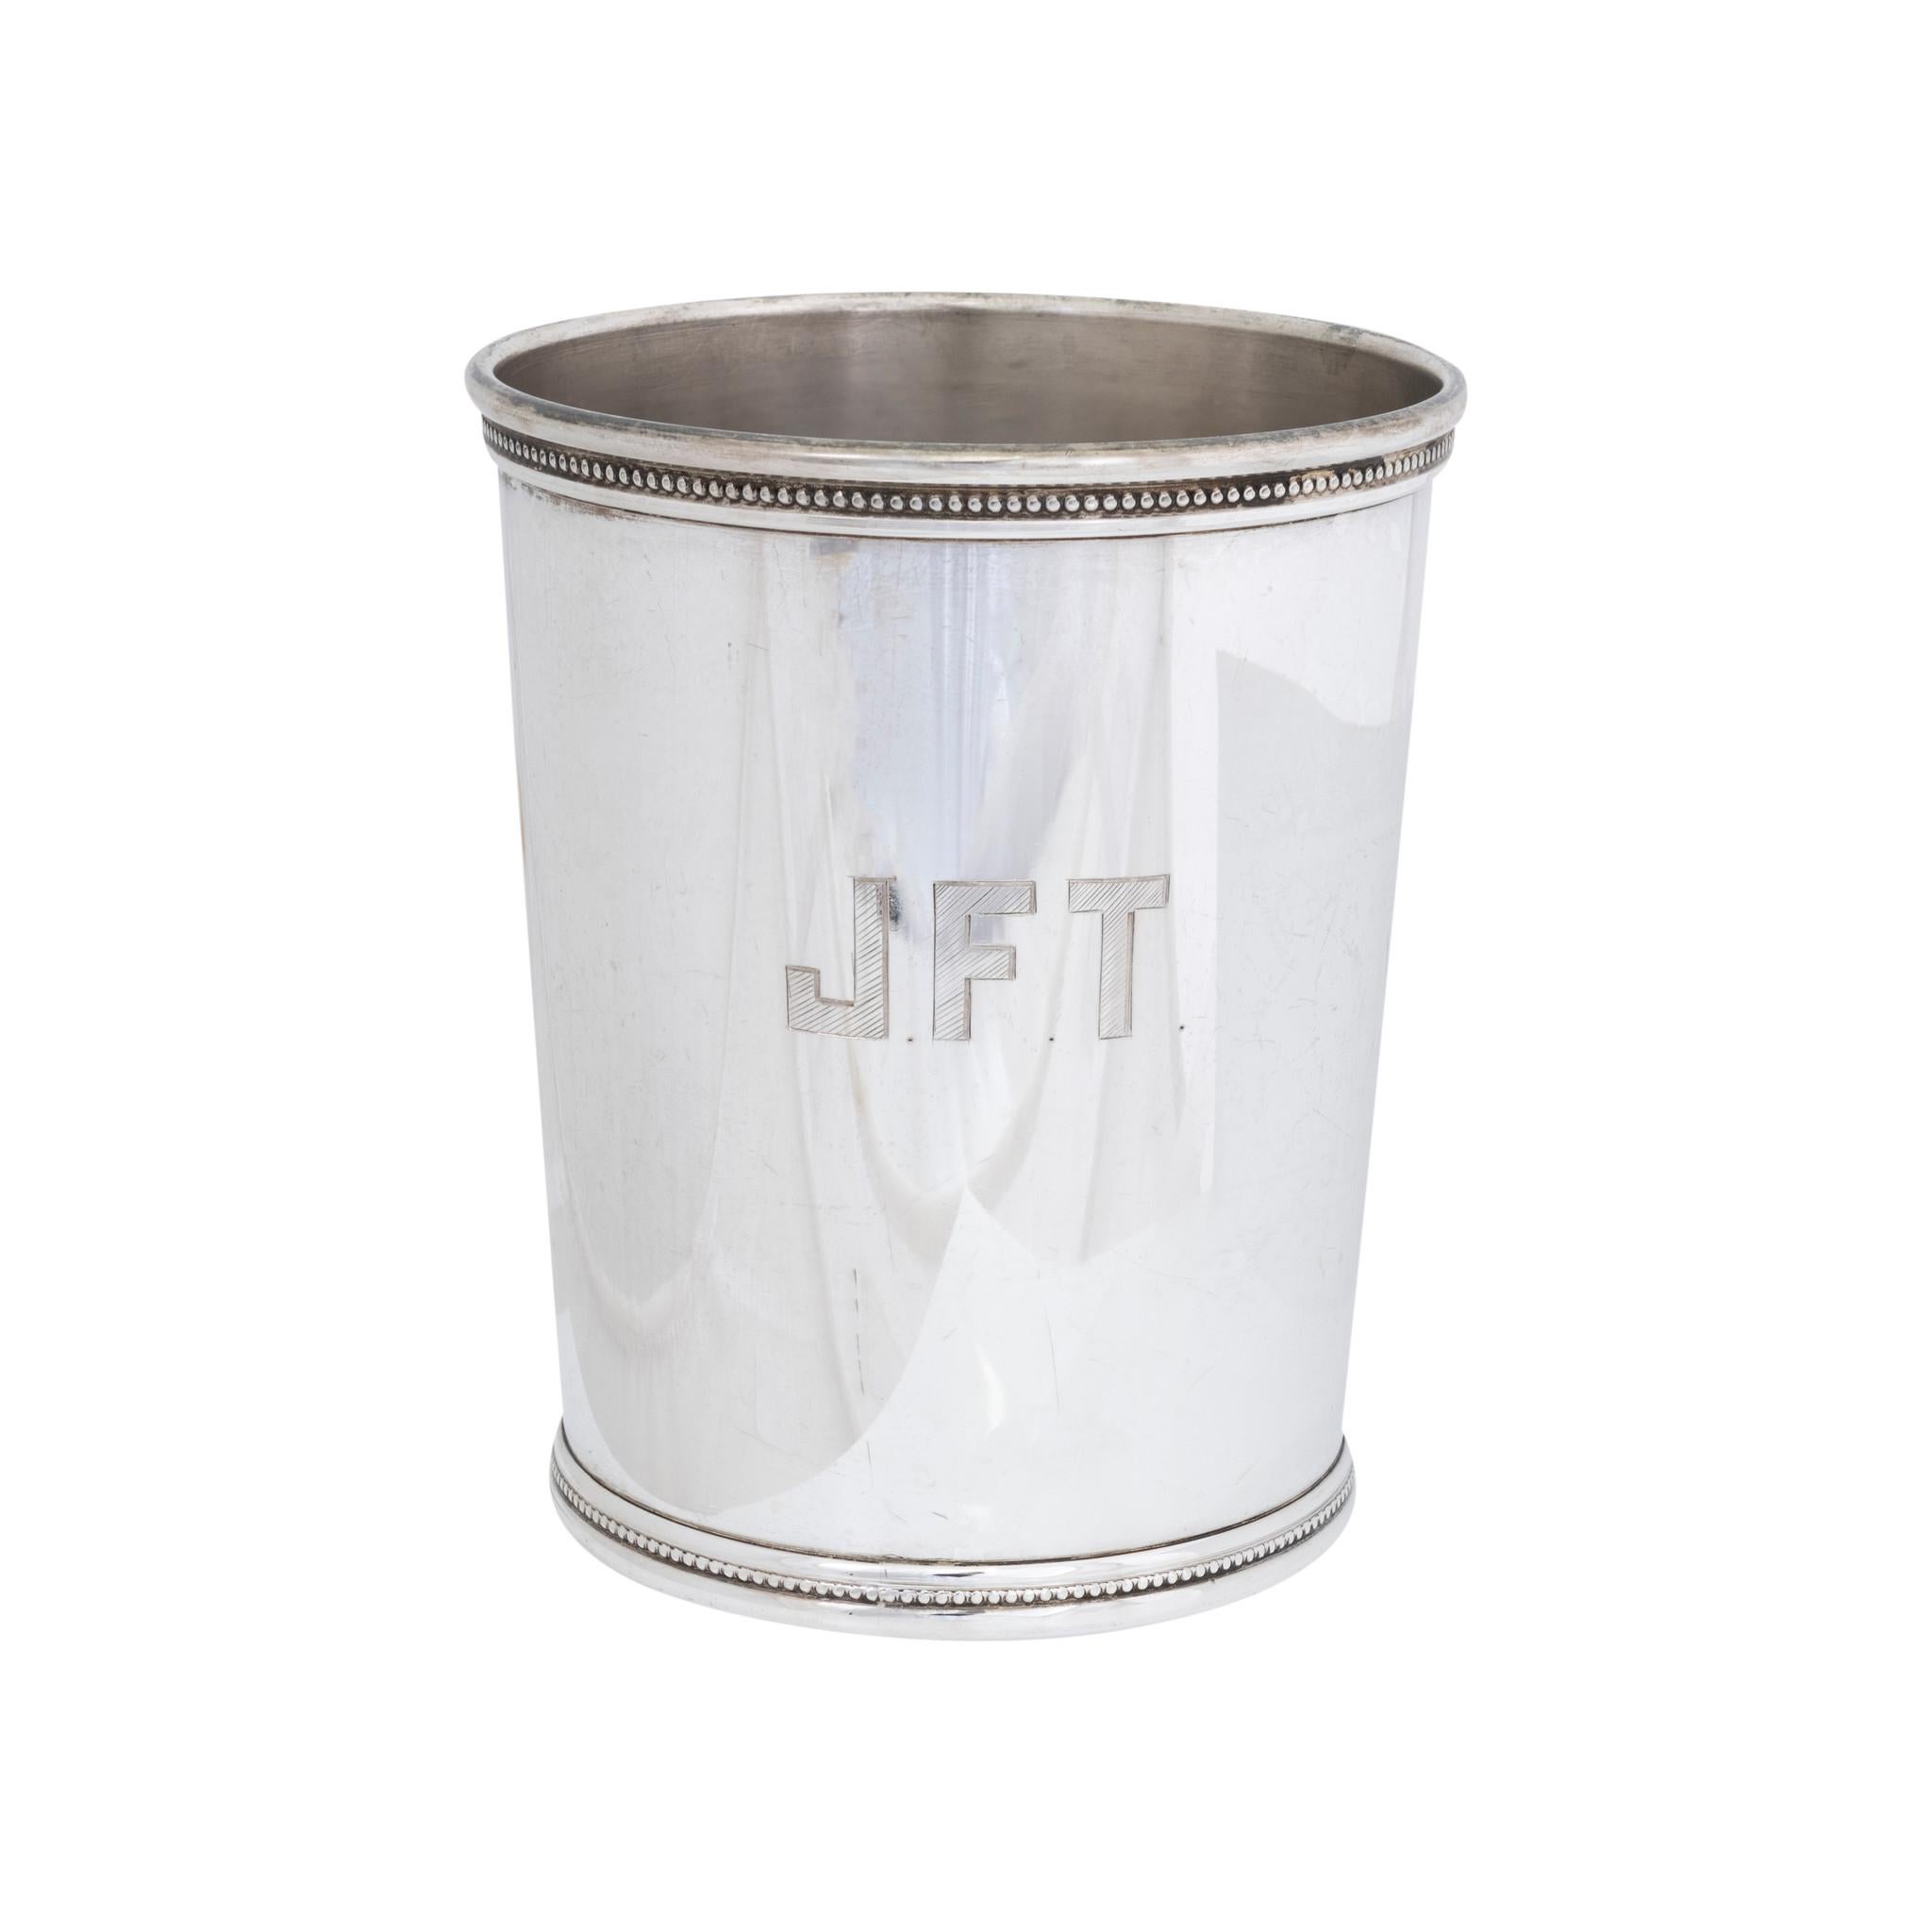 Women's or Men's Sterling Mint Julep Cups and Tray For Sale